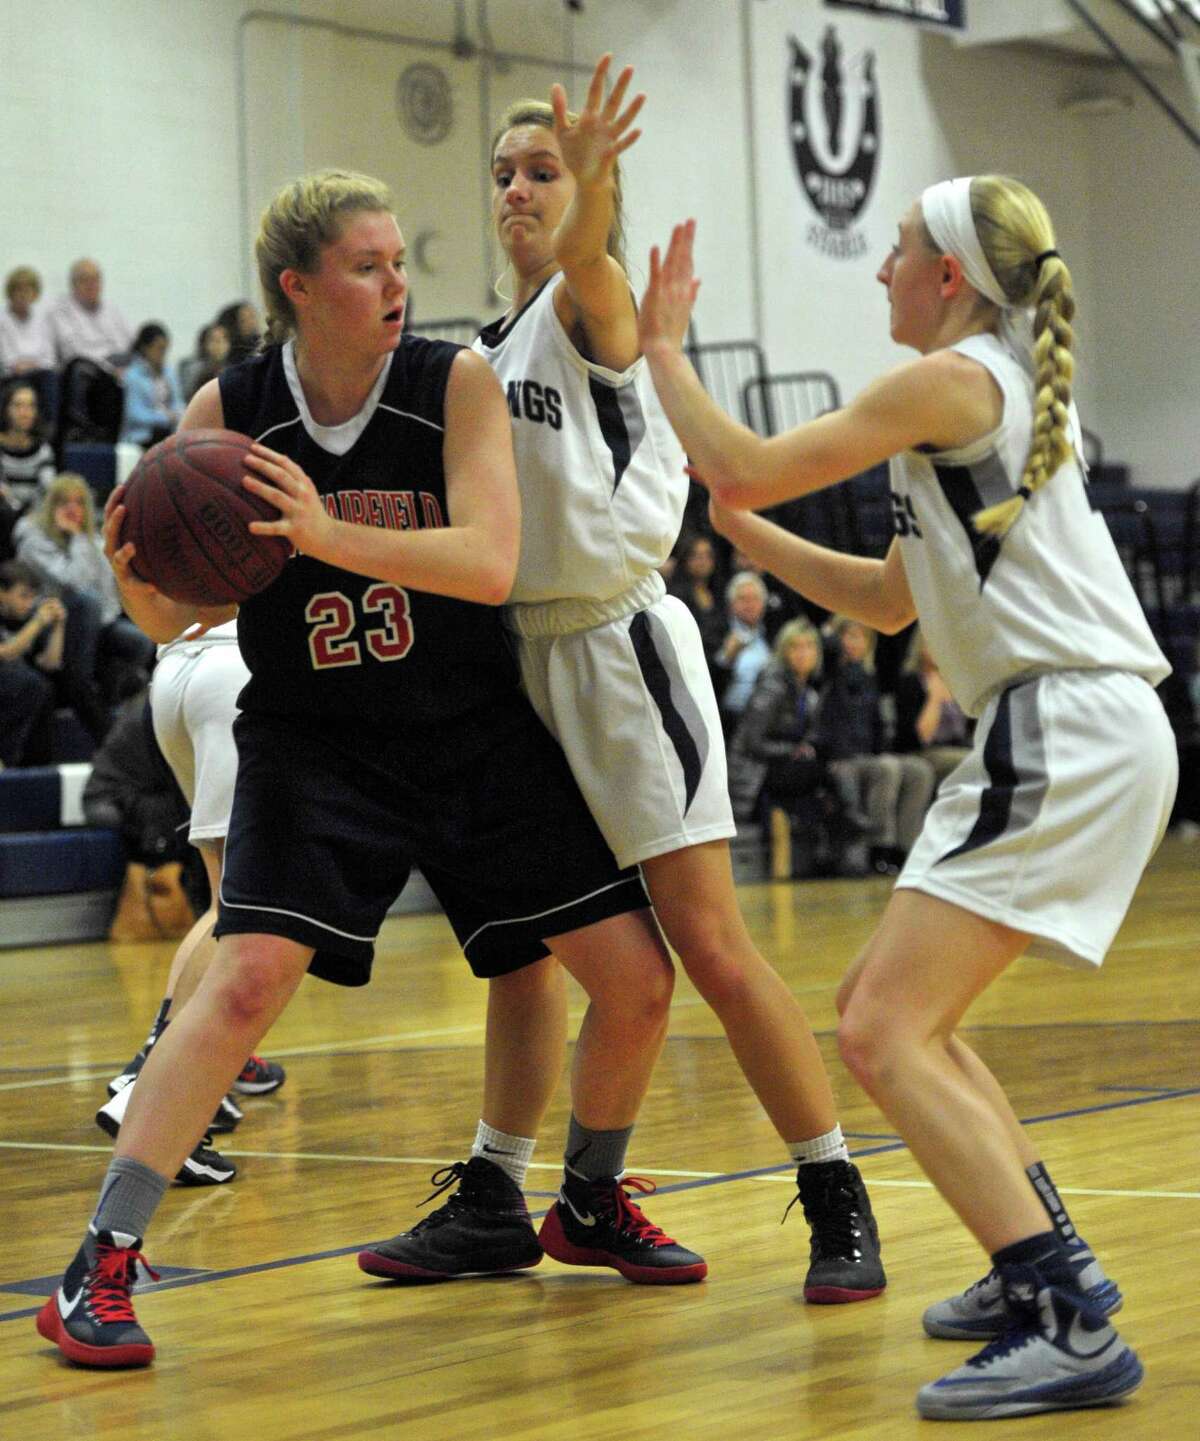 FILE PHOTO: Immaculate's Marcella Daily (12) and Caroline Wax (4) box in New Fairfield's Kristen Teklits (23) after she pulled down a rebound in the girls basketball game between New Fairfield and Immaculate high school, on Tuesday night, February 2, 2016, at Immaculate High School, in Danbury, Conn.